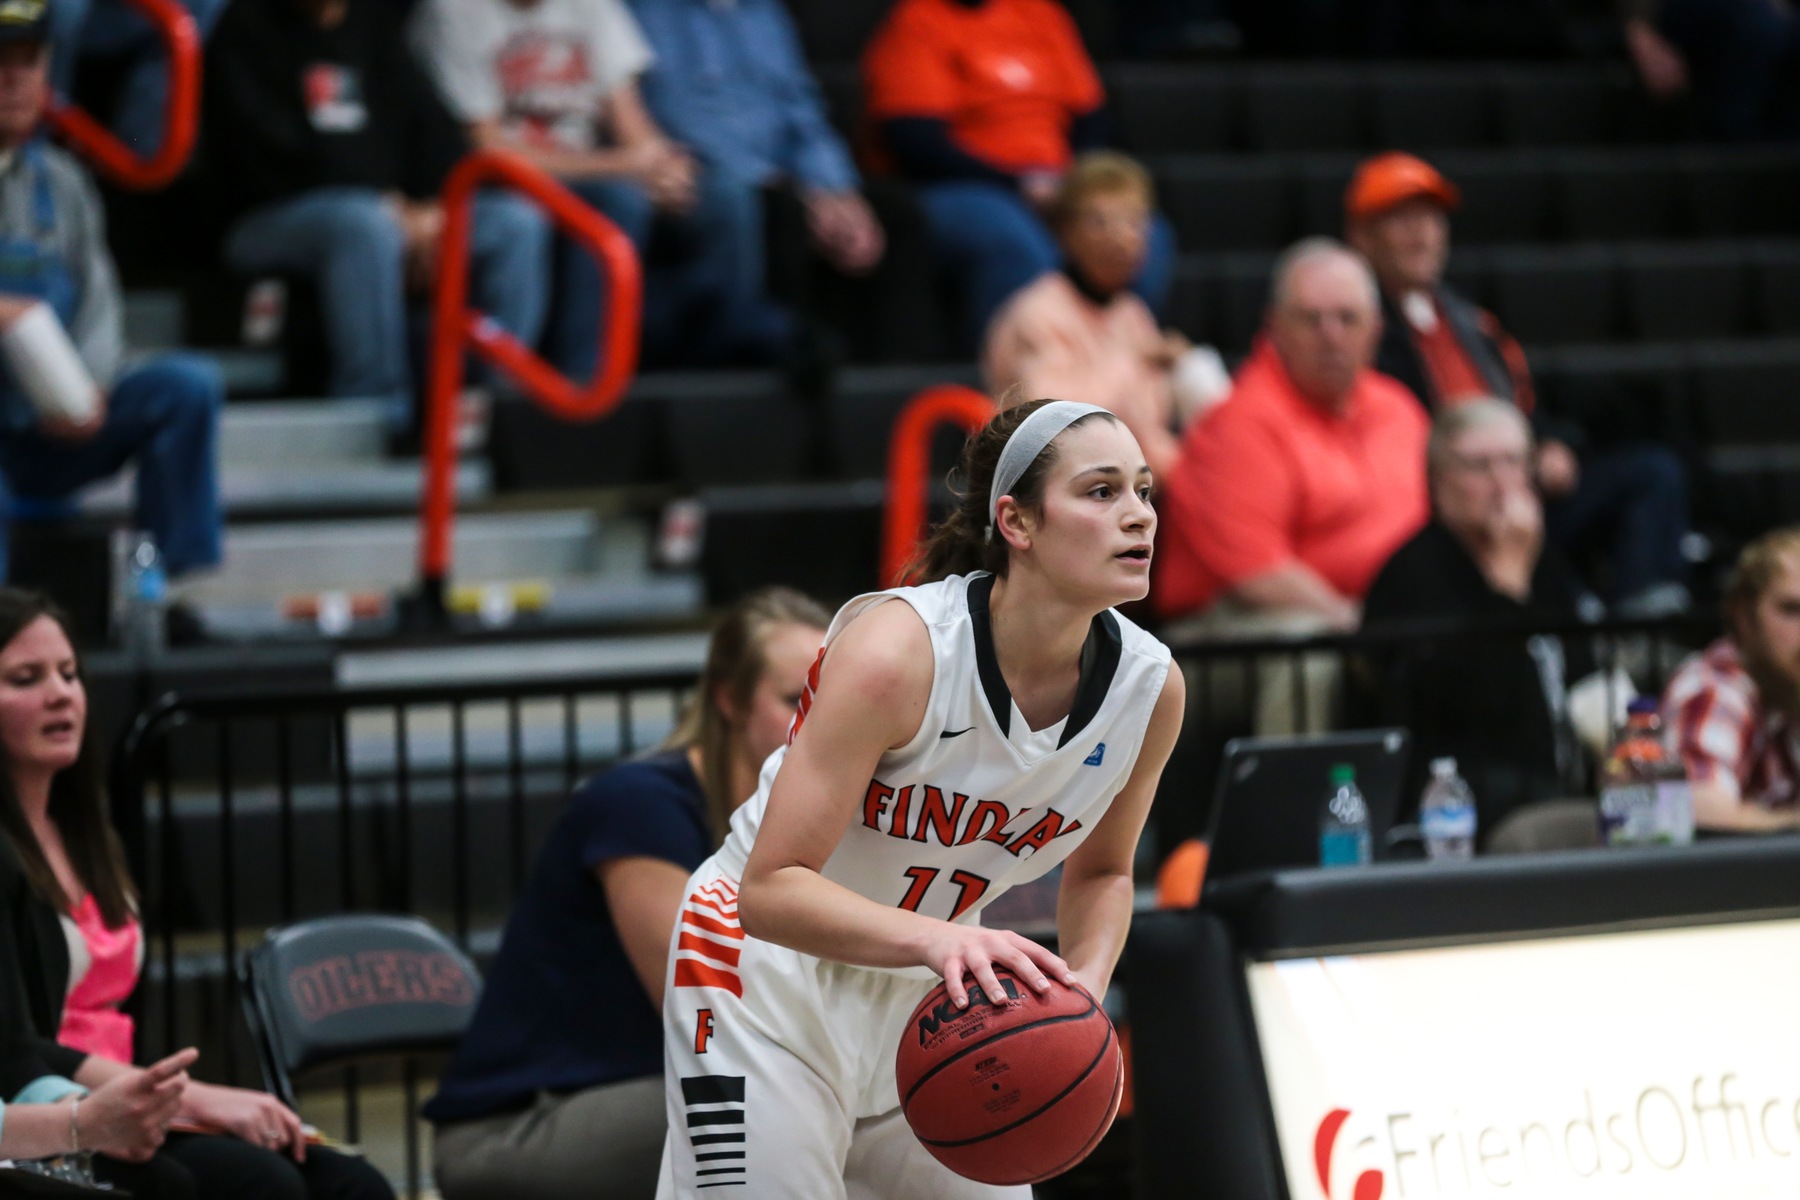 Englebrecht Leads Oilers to 73-51 Win at KWC